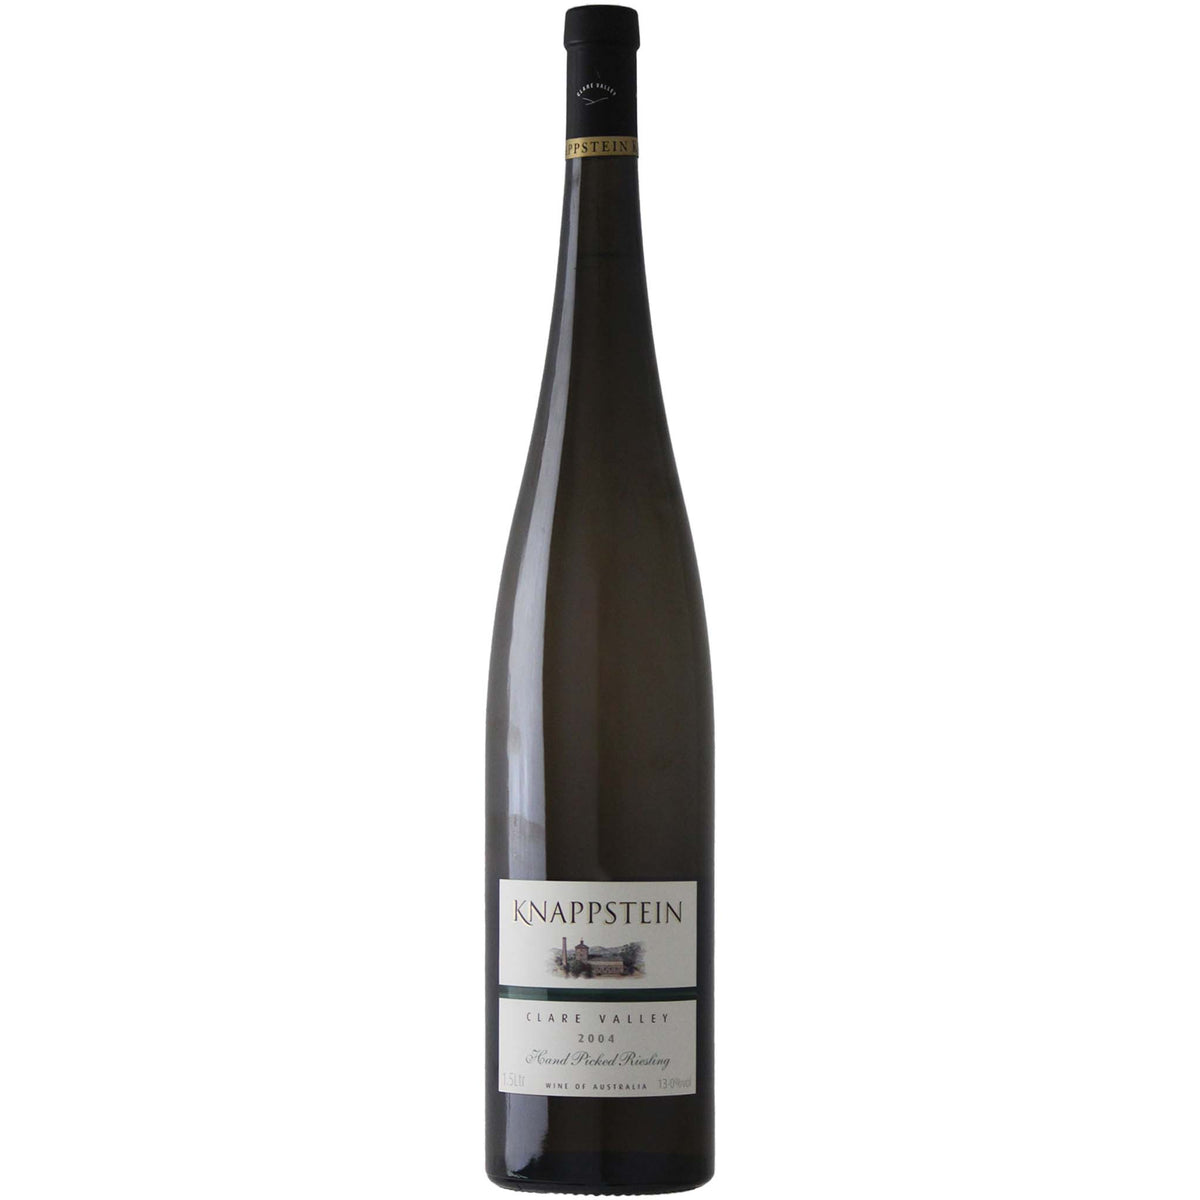 Knappstein-Hand-Picked-Riesling-2004-1500ml